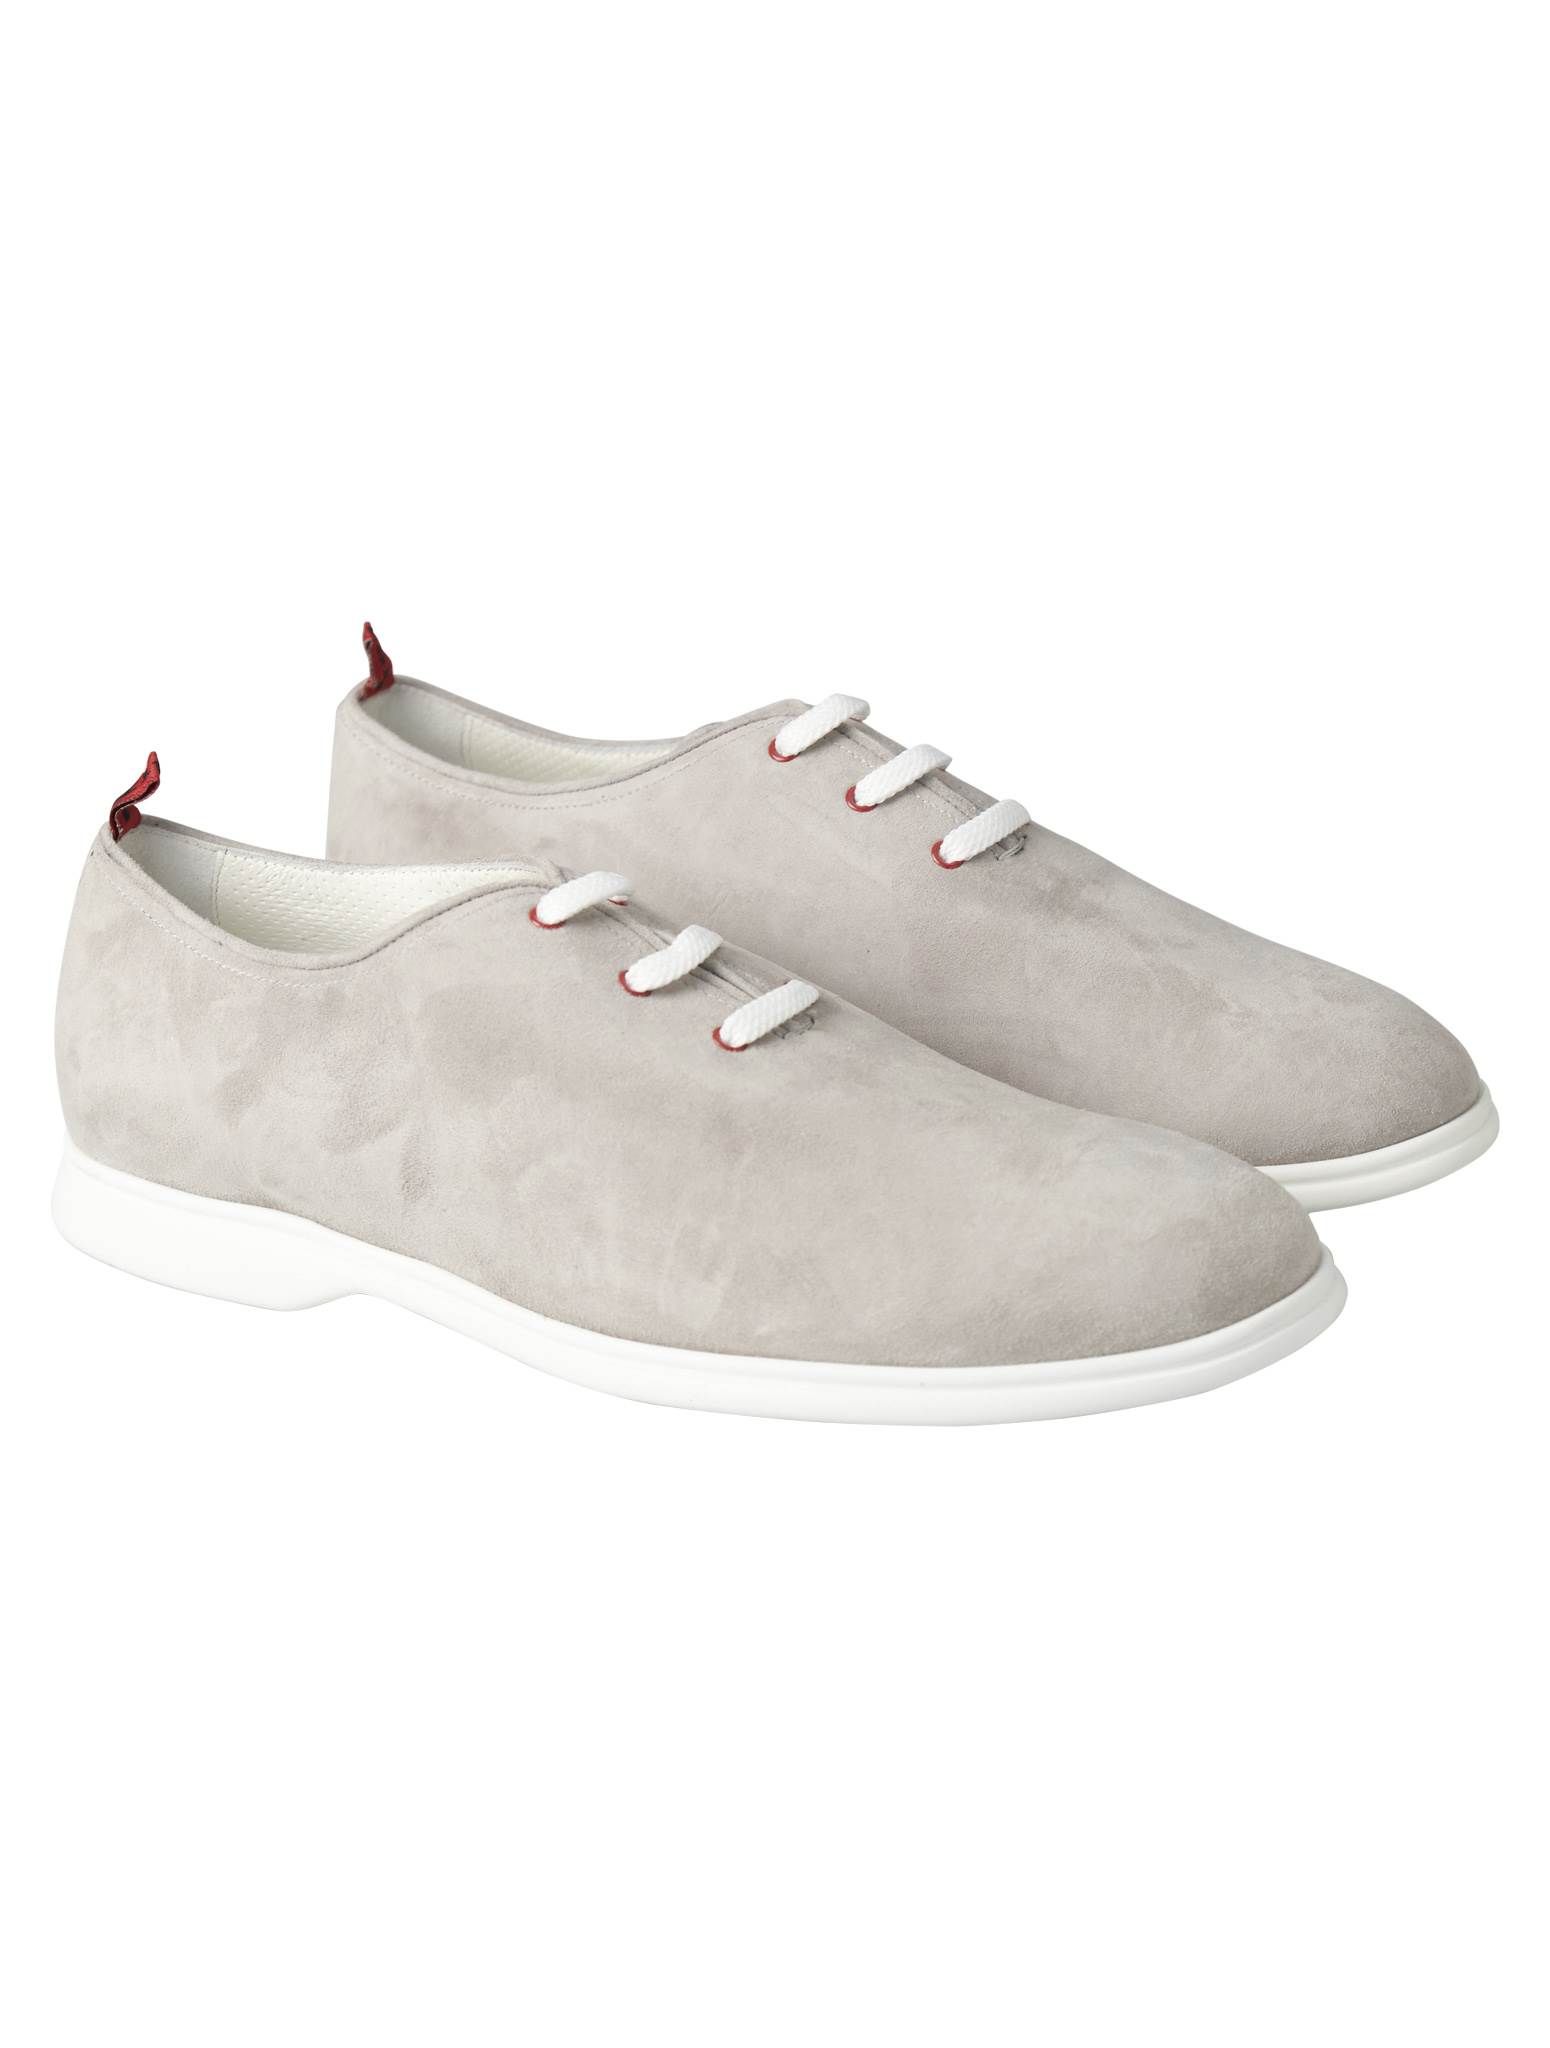 Kiton Gray Leather Suede Sneaker